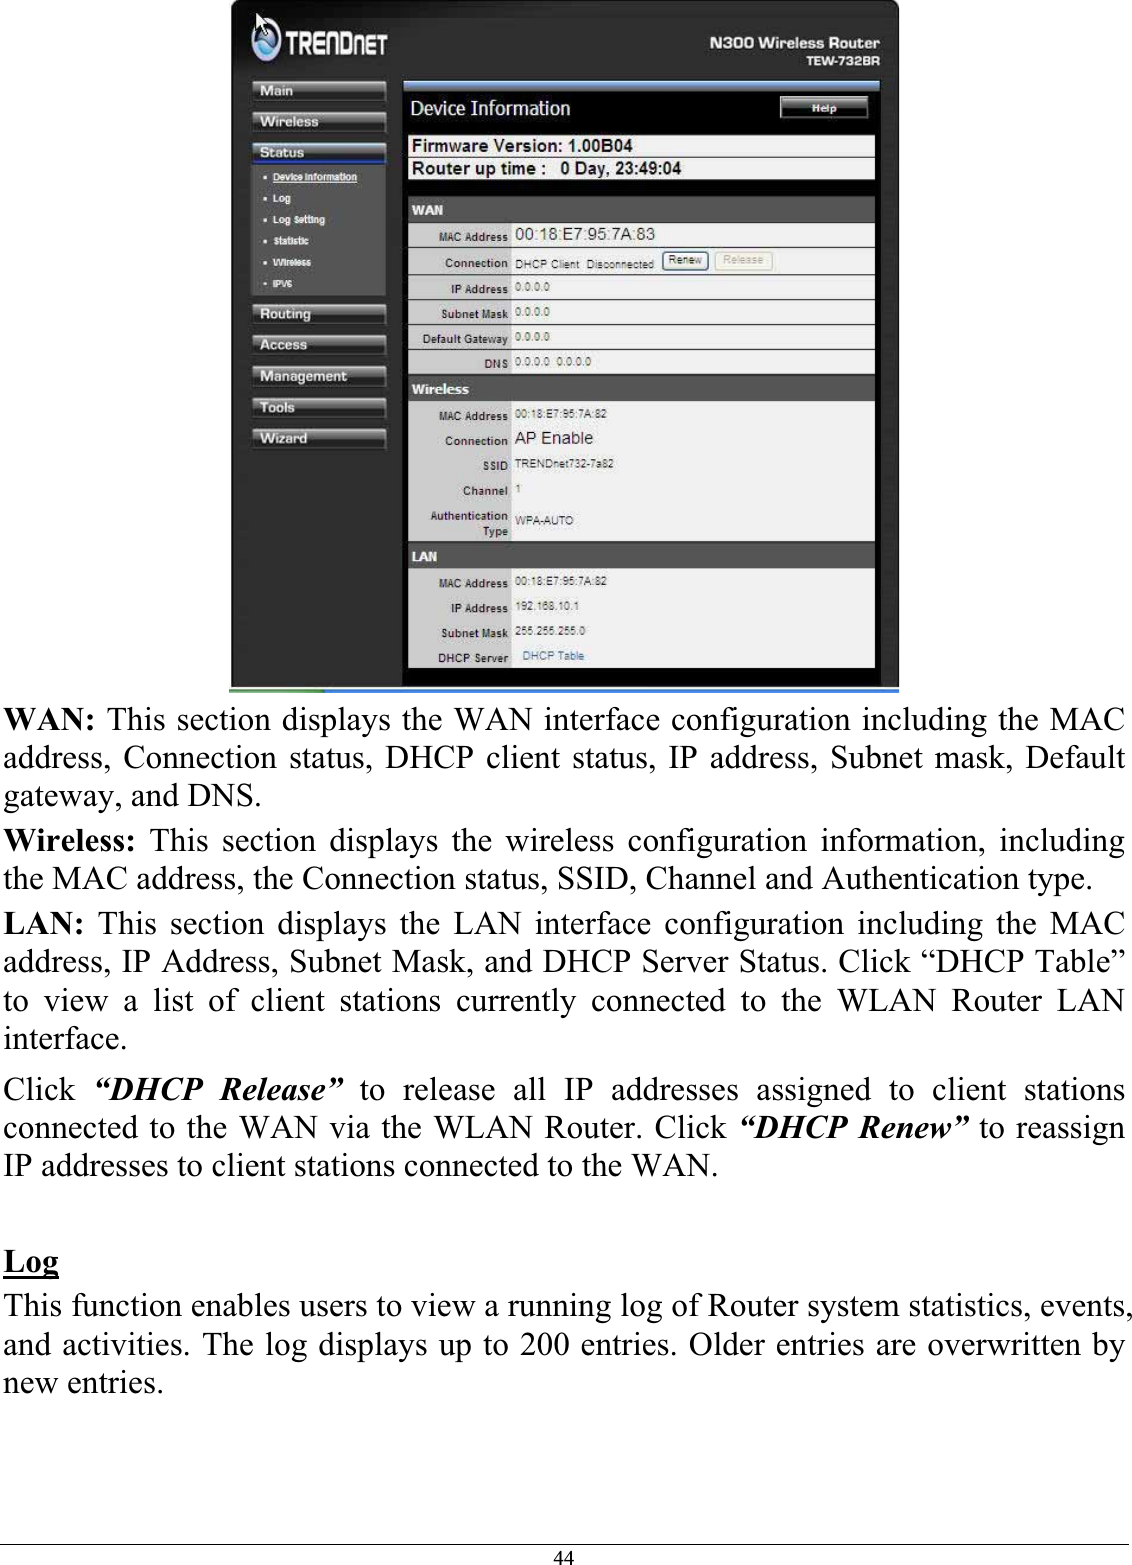 44WAN: This section displays the WAN interface configuration including the MAC address, Connection status, DHCP client status, IP address, Subnet mask, Default gateway, and DNS.Wireless: This section displays the wireless configuration information, including the MAC address, the Connection status, SSID, Channel and Authentication type. LAN: This section displays the LAN interface configuration including the MAC address, IP Address, Subnet Mask, and DHCP Server Status. Click “DHCP Table” to view a list of client stations currently connected to the WLAN Router LAN interface.Click “DHCP Release” to release all IP addresses assigned to client stations connected to the WAN via the WLAN Router. Click “DHCP Renew” to reassign IP addresses to client stations connected to the WAN. LogThis function enables users to view a running log of Router system statistics, events, and activities. The log displays up to 200 entries. Older entries are overwritten by new entries.  